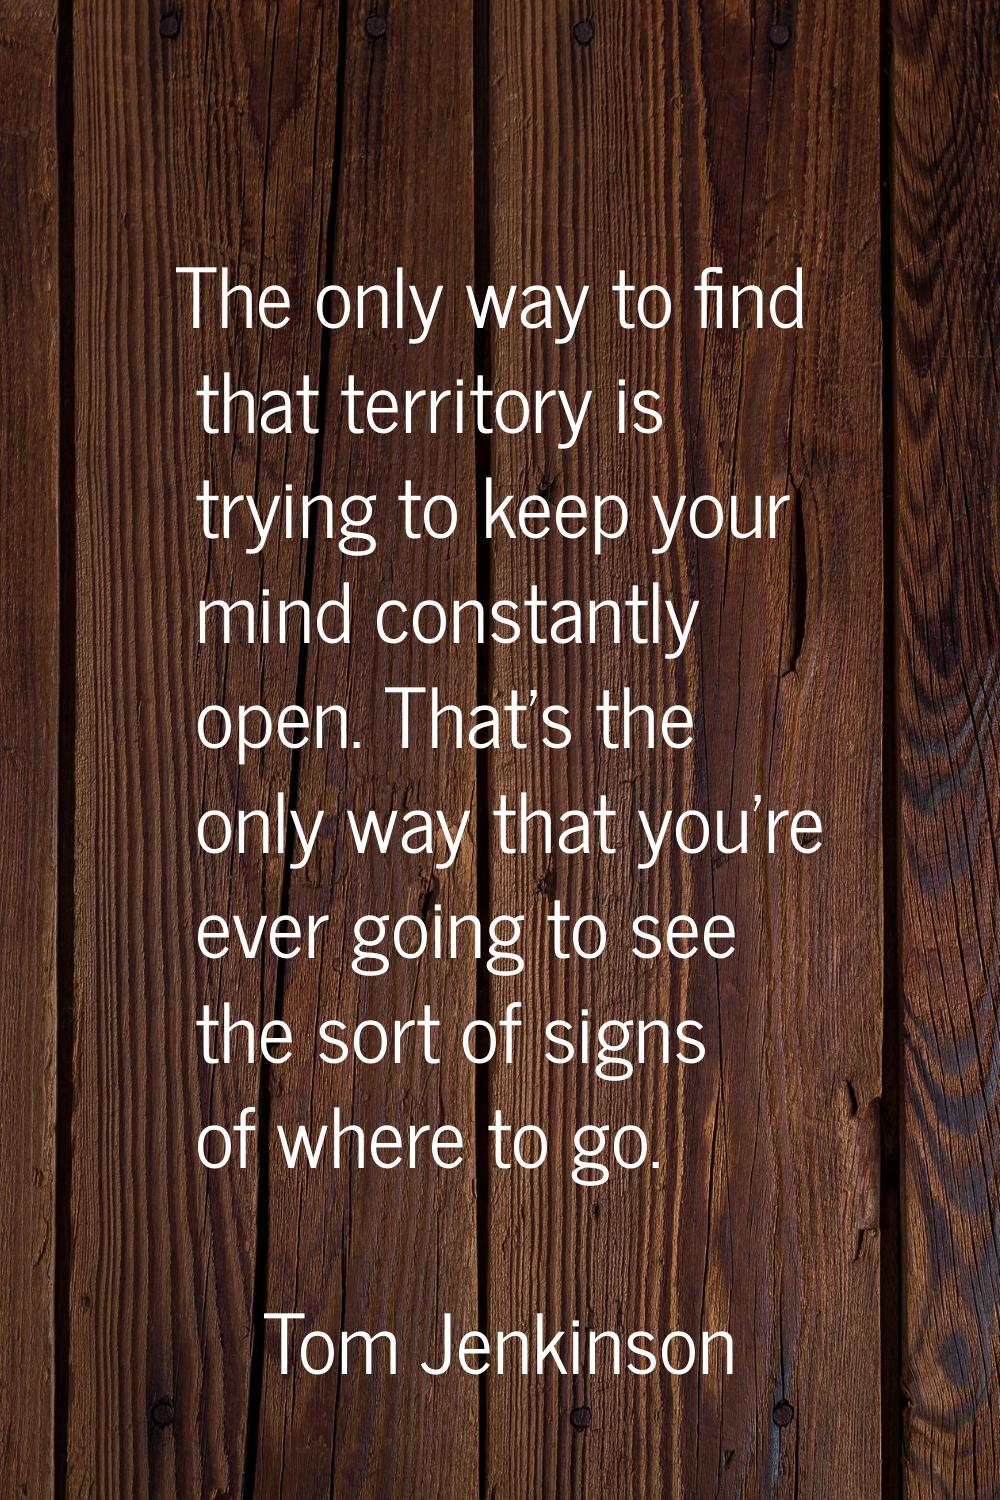 The only way to find that territory is trying to keep your mind constantly open. That's the only wa